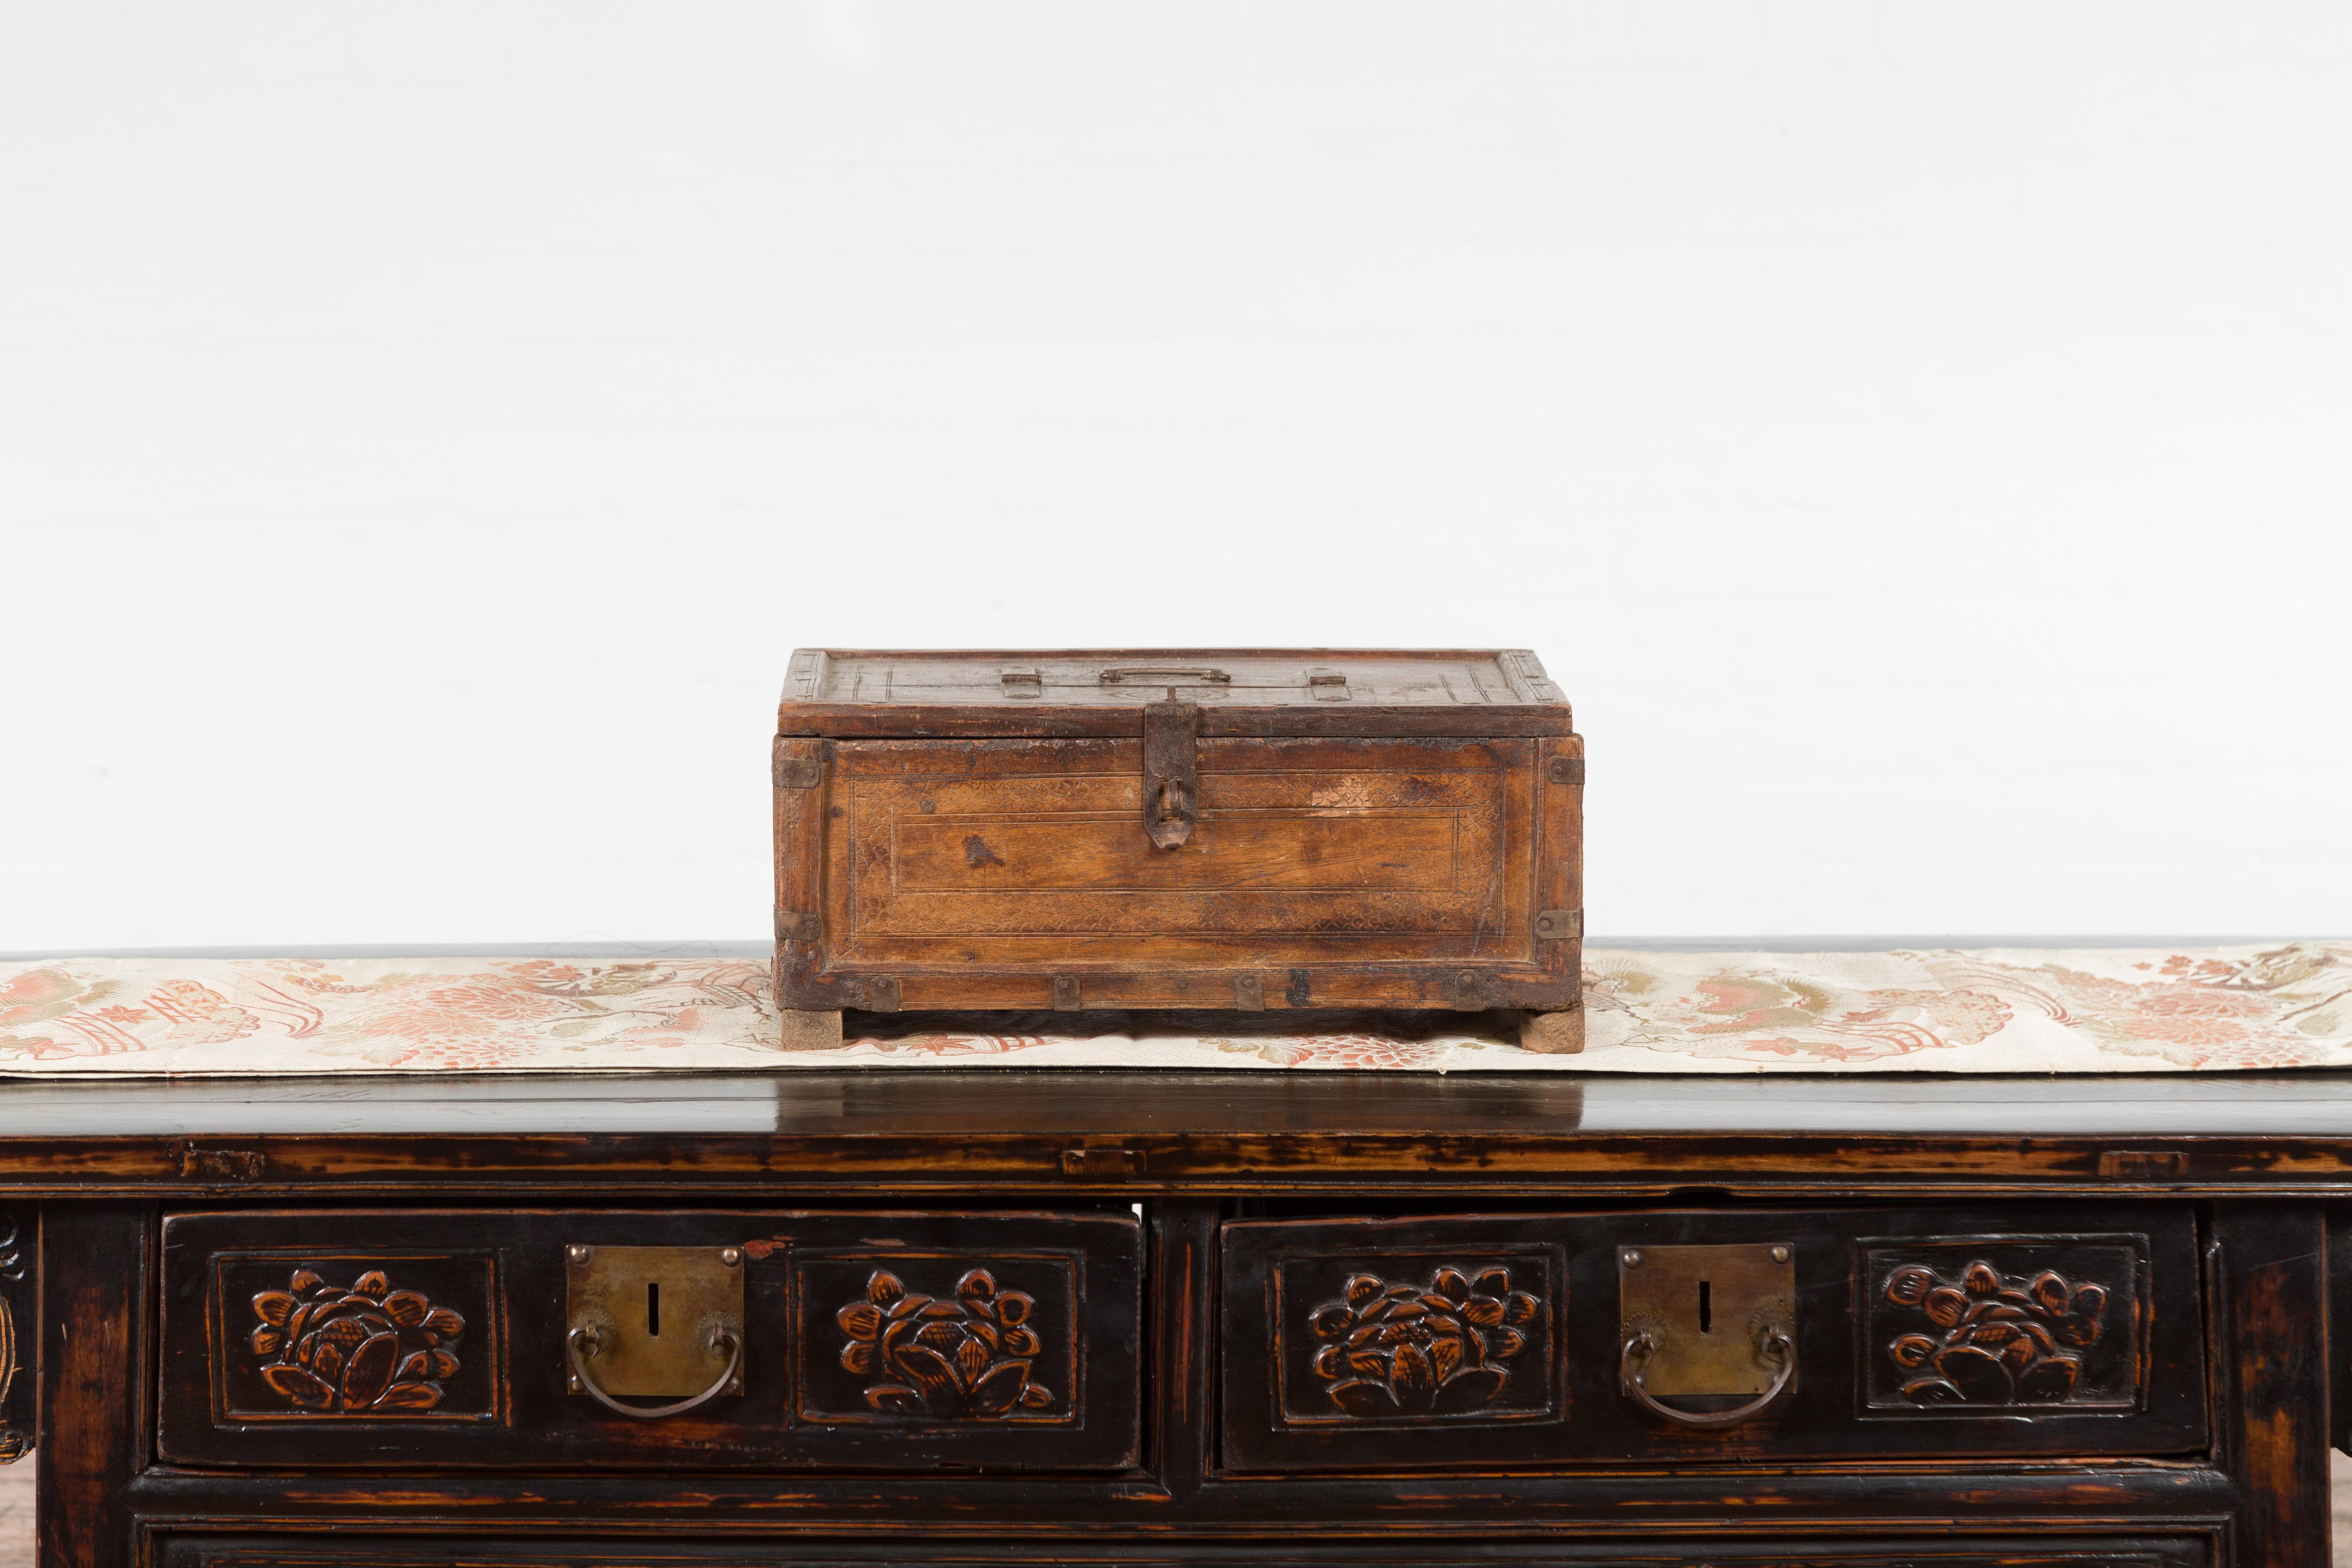 An Indian antique wooden box from the 19th century, with incised motifs and distressed patina. Topped with a rectangular lid accented with pierced concentric circles and half opening to reveal a small interior, this old Indian box is adorned with